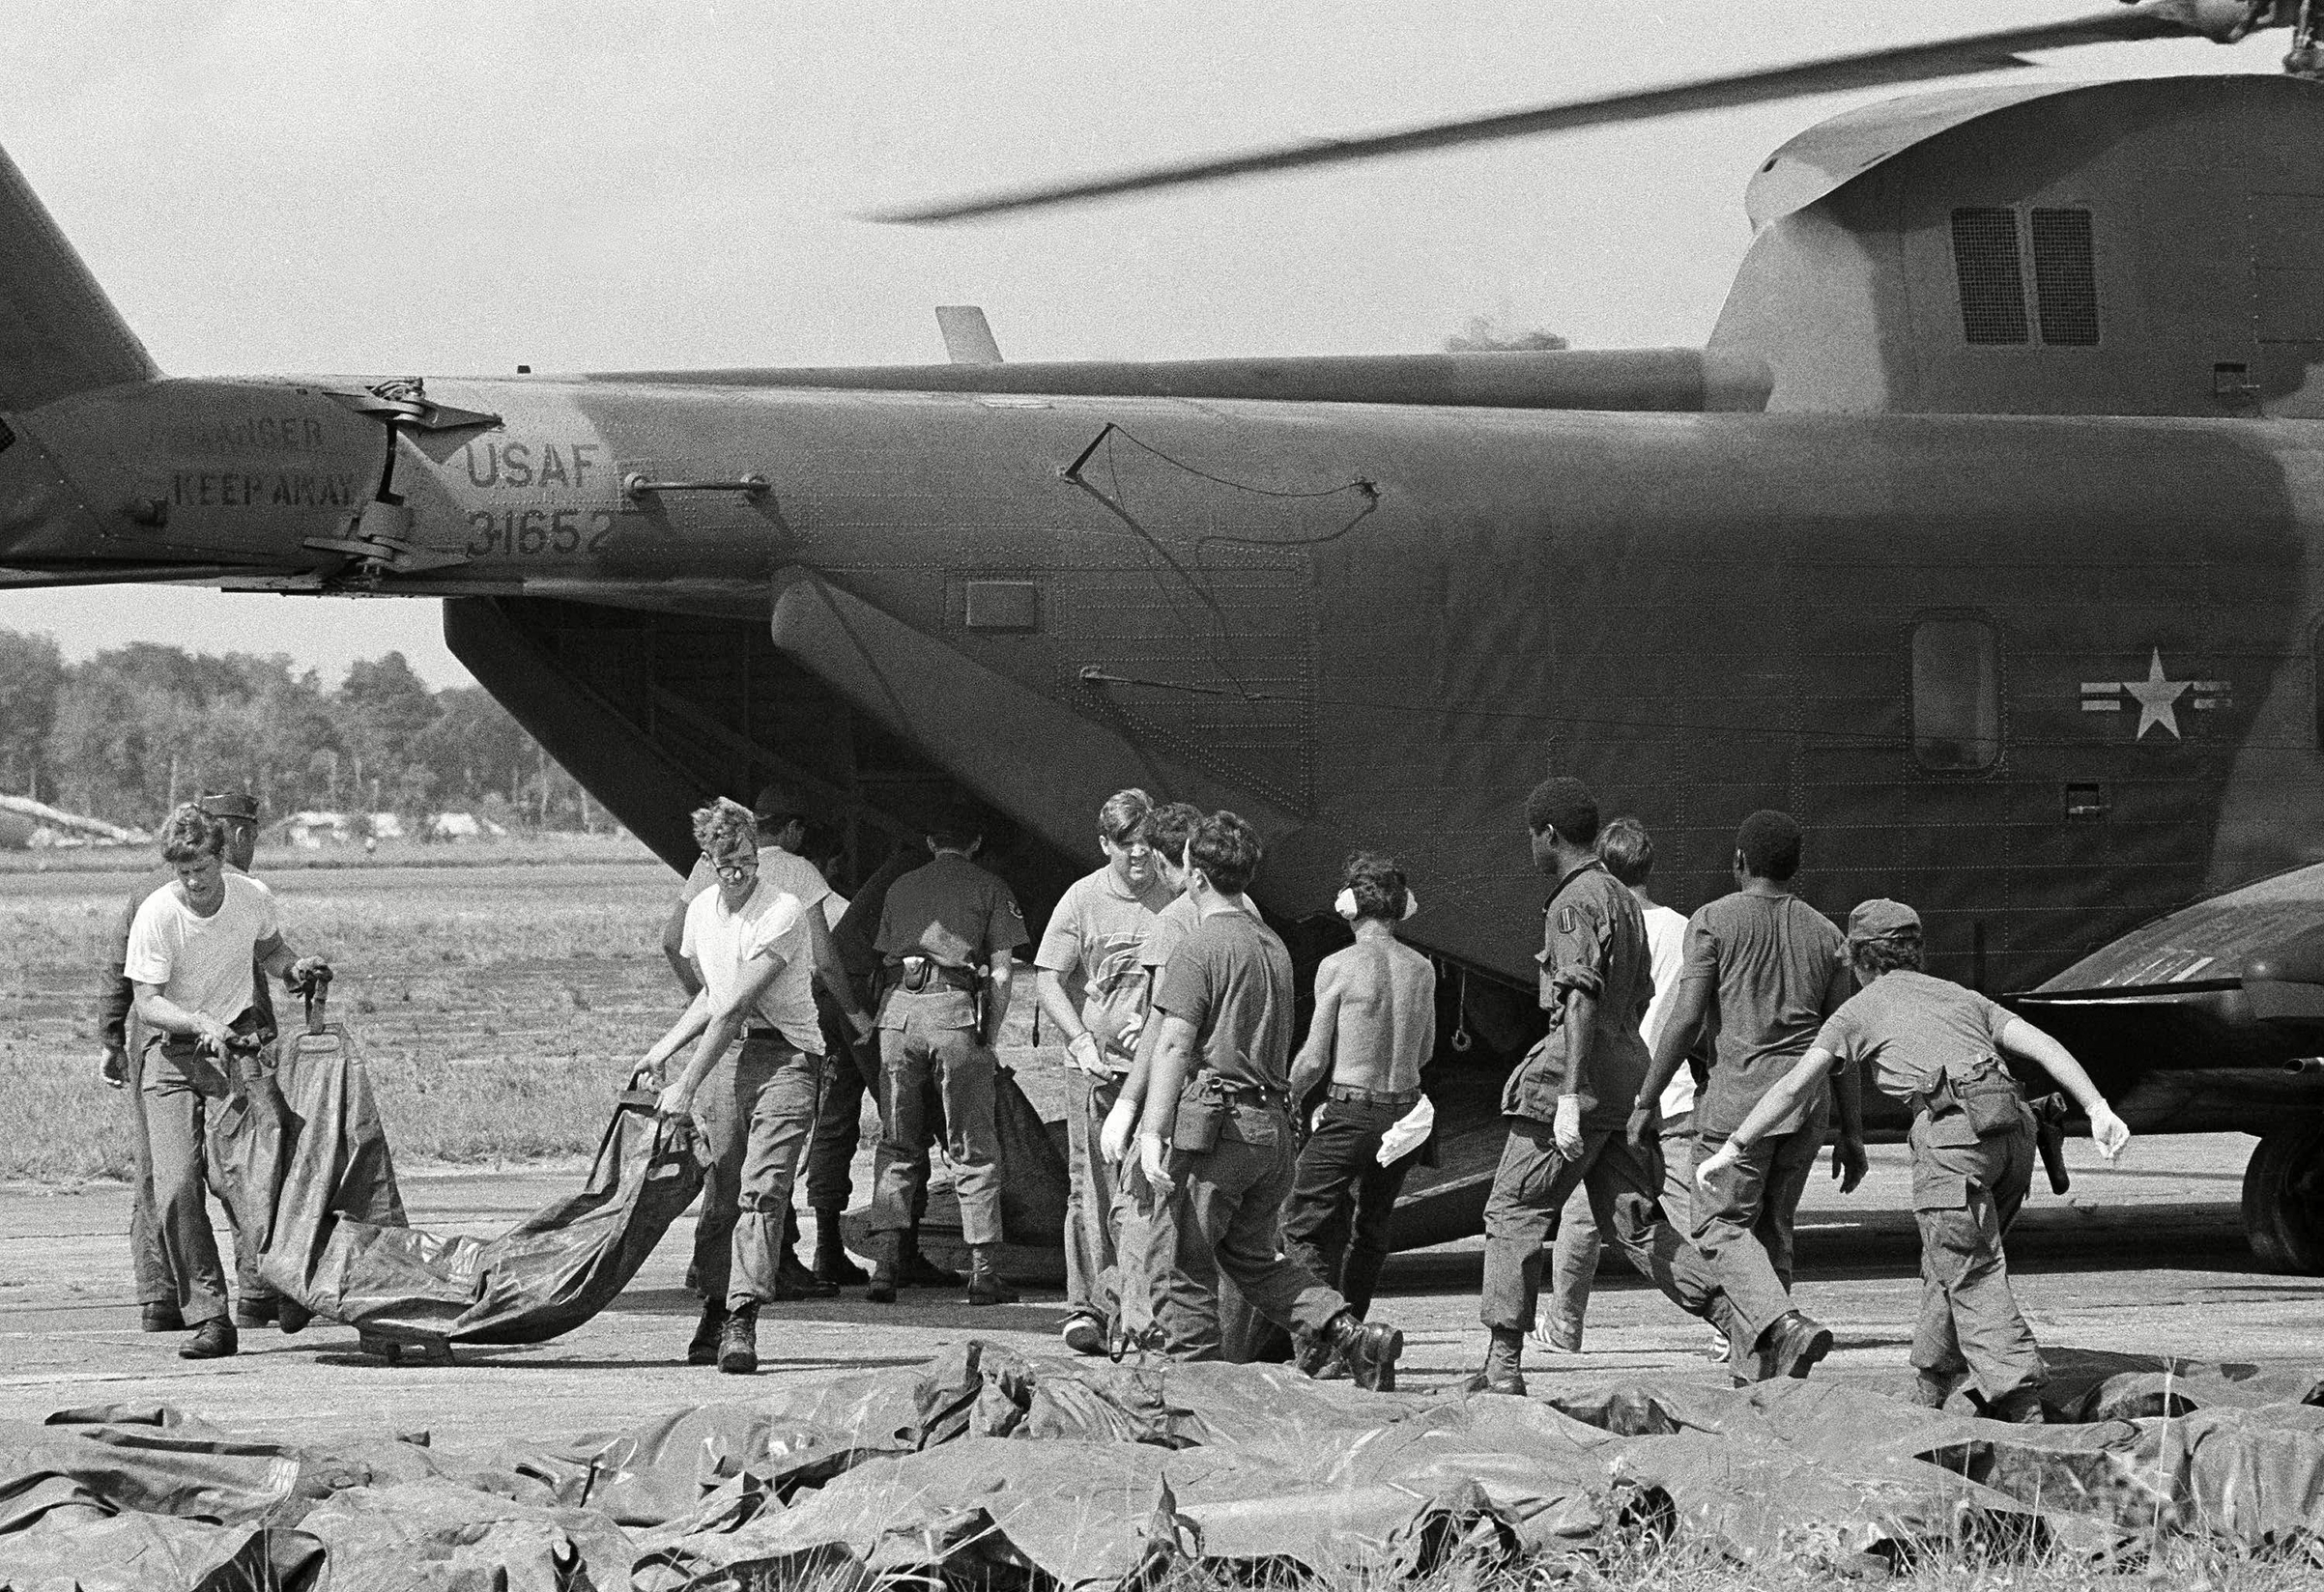 Bodies of victims of Jonestown mass suicide are loaded from U.S. military helicopter at Georgetown's international airport. The corpses, in body bags, will be transferred to shipping containers for the flight back to the U.S. (AP/Shutterstock)